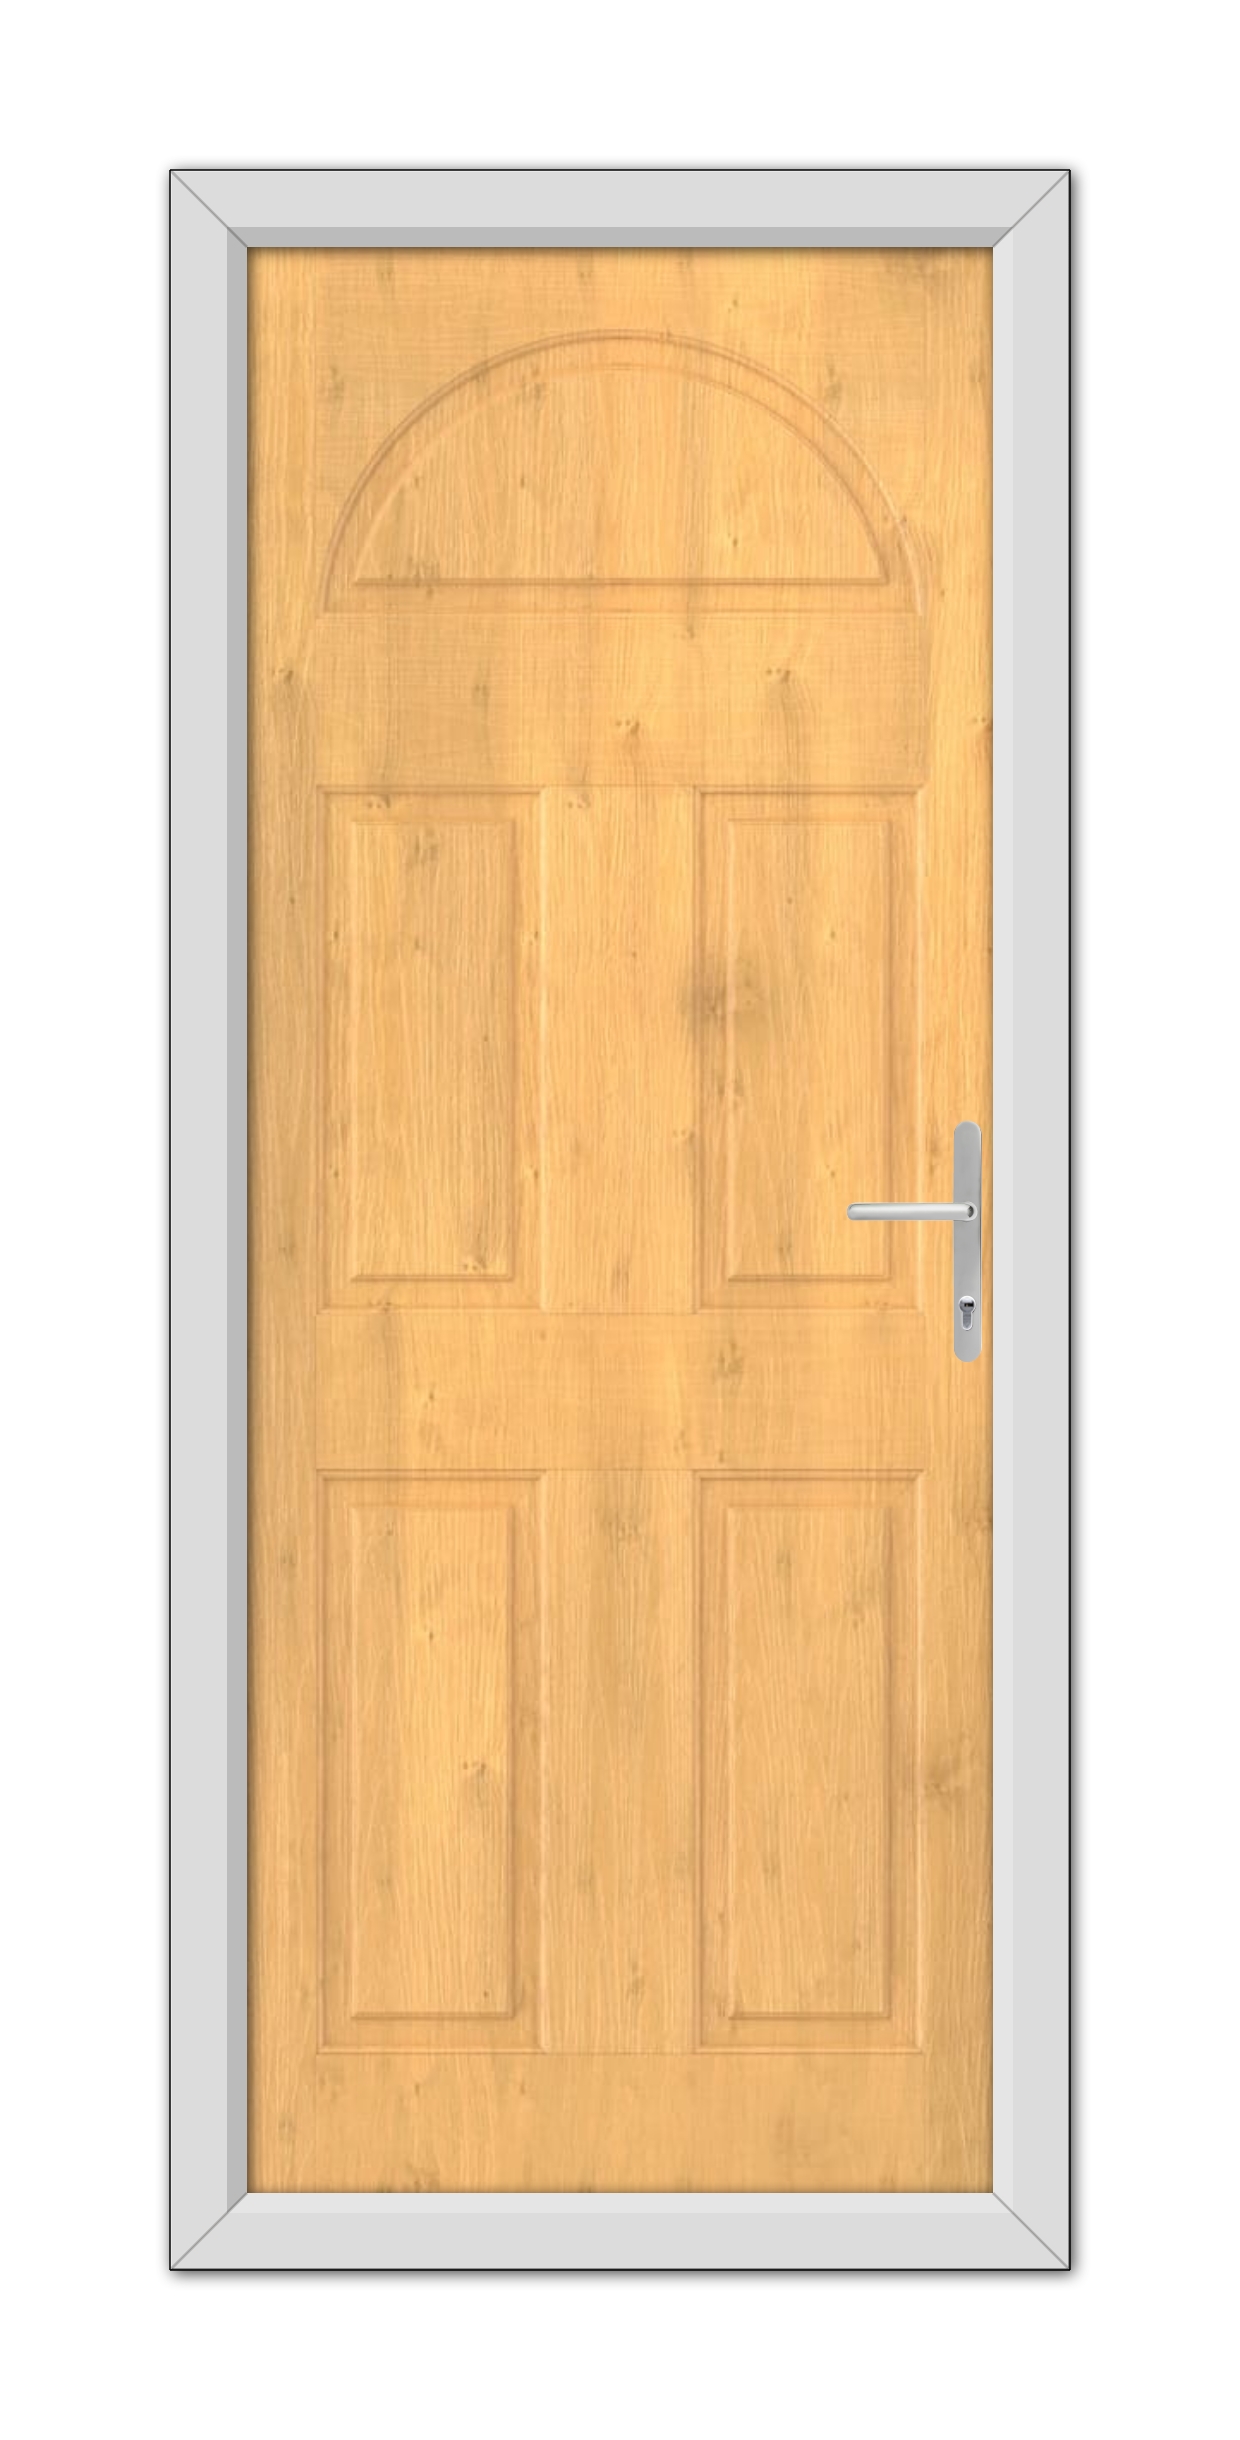 An Irish Oak Winslow Solid Composite Door with an arched top and a metallic handle, set within a simple gray frame.